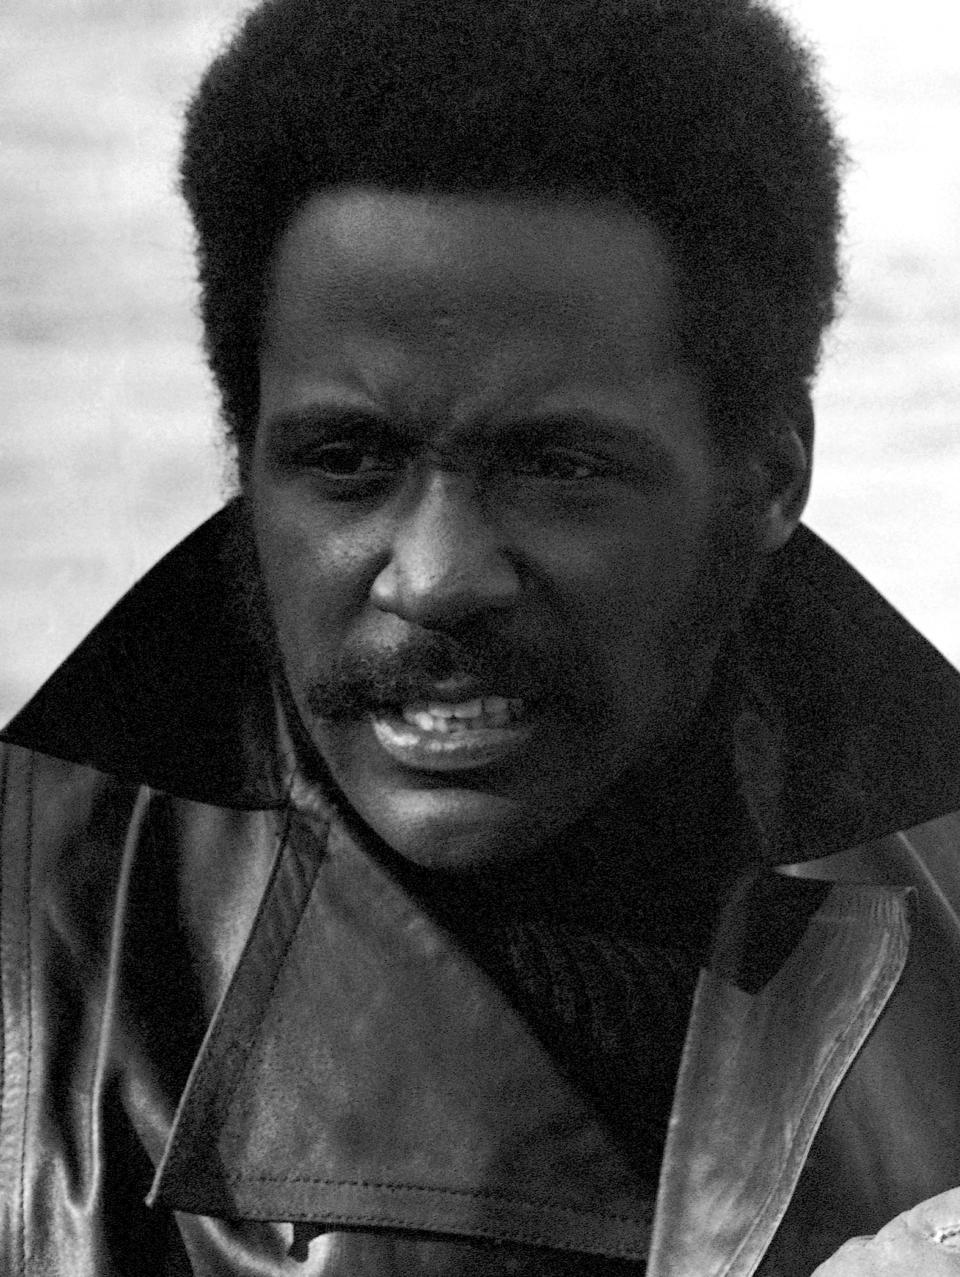 FILE - Richard Roundtree, one of the stars of "Big Bamboo," is seen during filming in New York, March 9, 1972. Roundtree, the trailblazing Black actor who starred as the ultra-smooth private detective “Shaft” in several films beginning in the early 1970s, has died. Roundtree died Tuesday, Oct. 24, 2023, at his home in Los Angeles, according to his longtime manager. He was 81. (AP Photo/Ron Frehm, File)